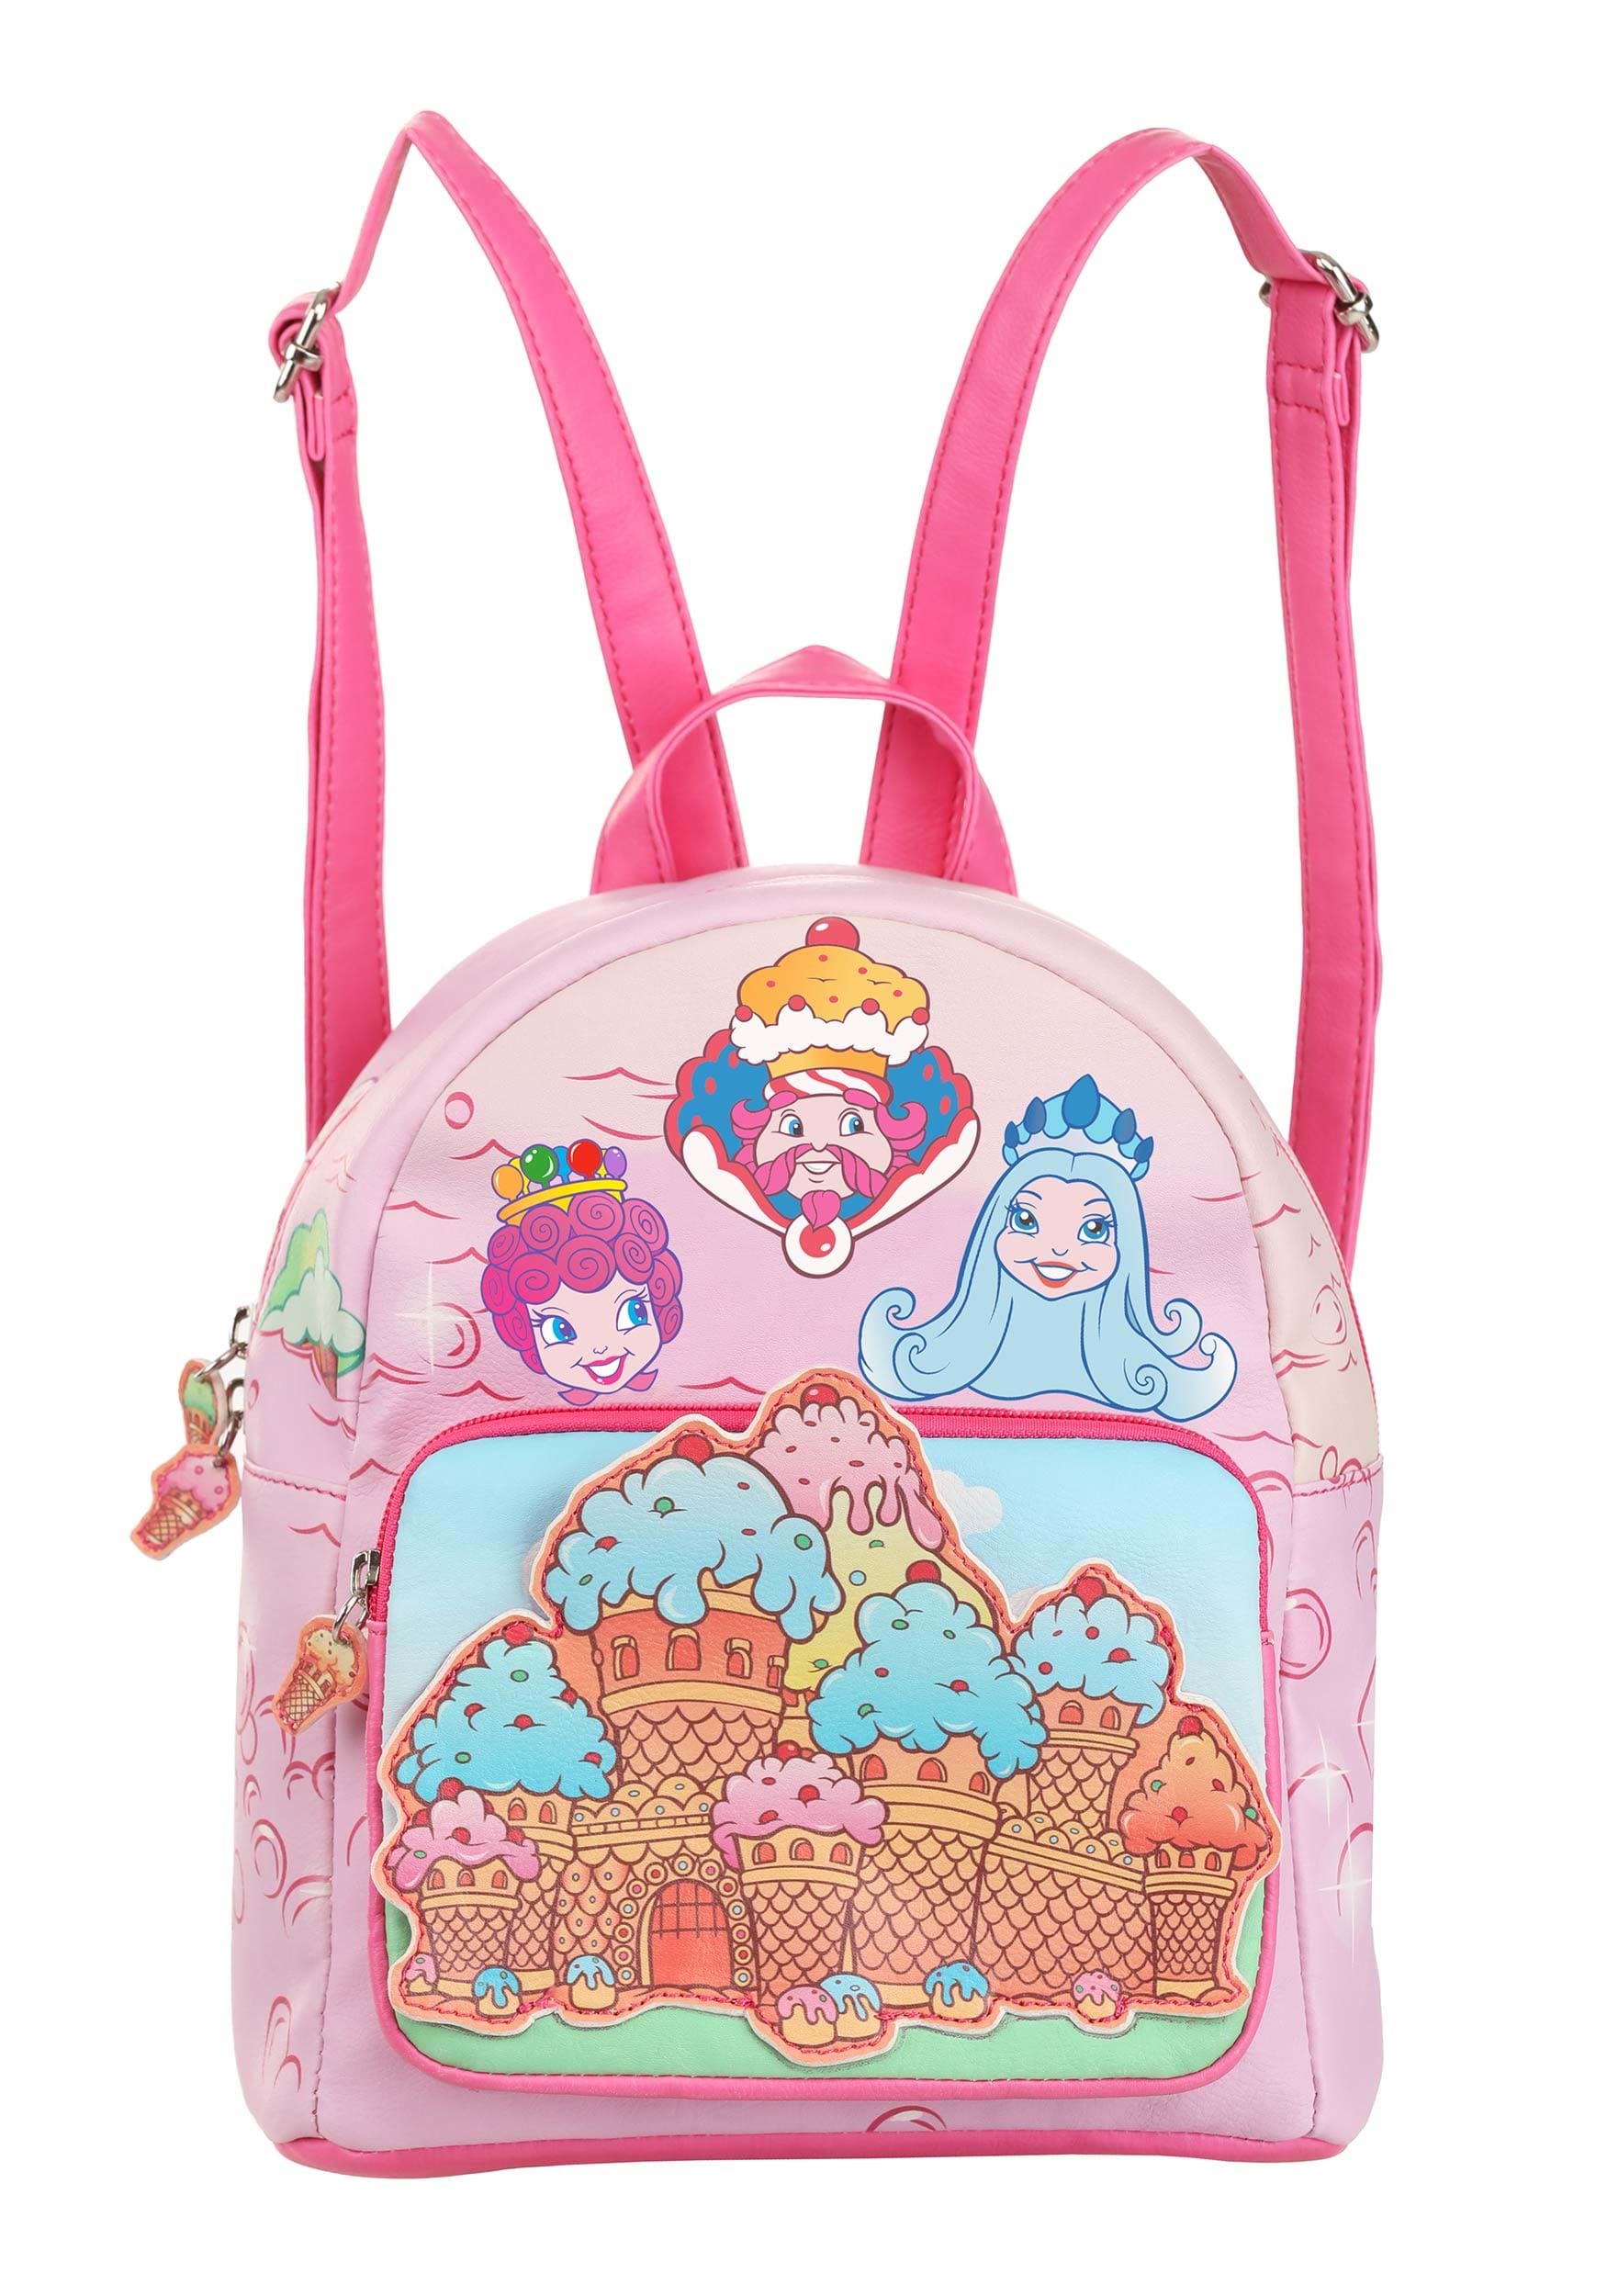 King Kandy's Candy Land Castle Mini Backpack , Board Game Bags